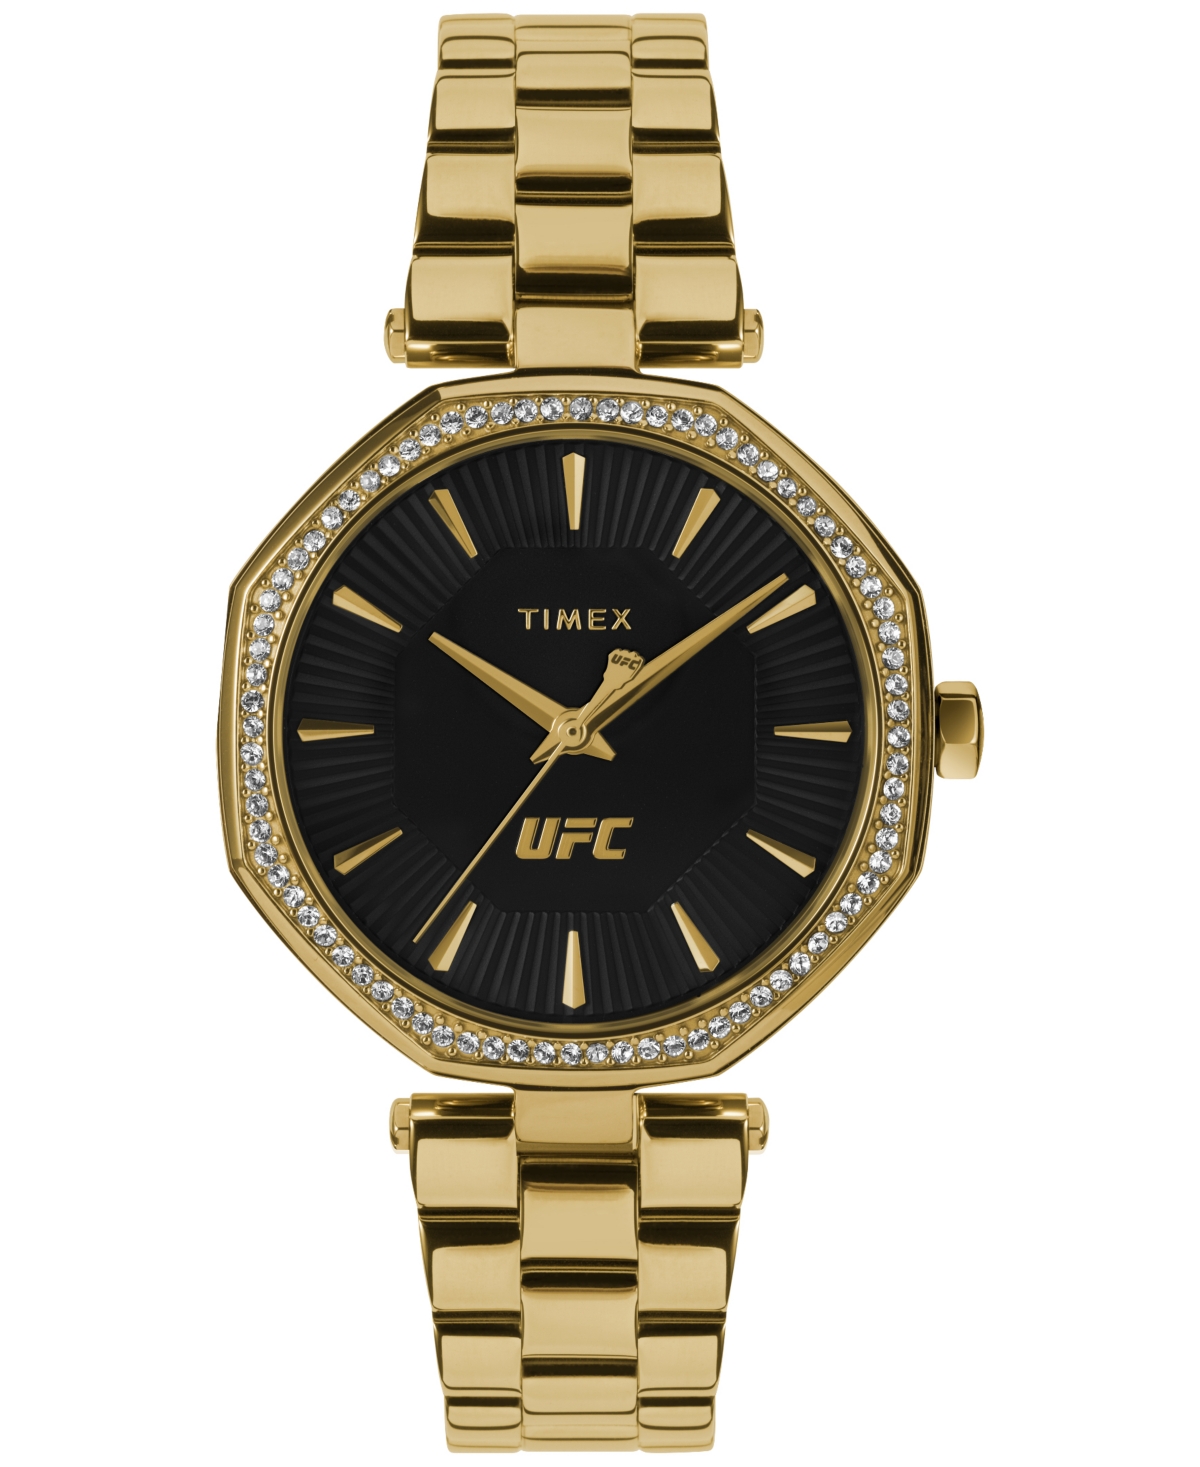 Ufc Women's Jewel Analog Gold-Tone Stainless Steel Watch, 36mm - Gold-Tone